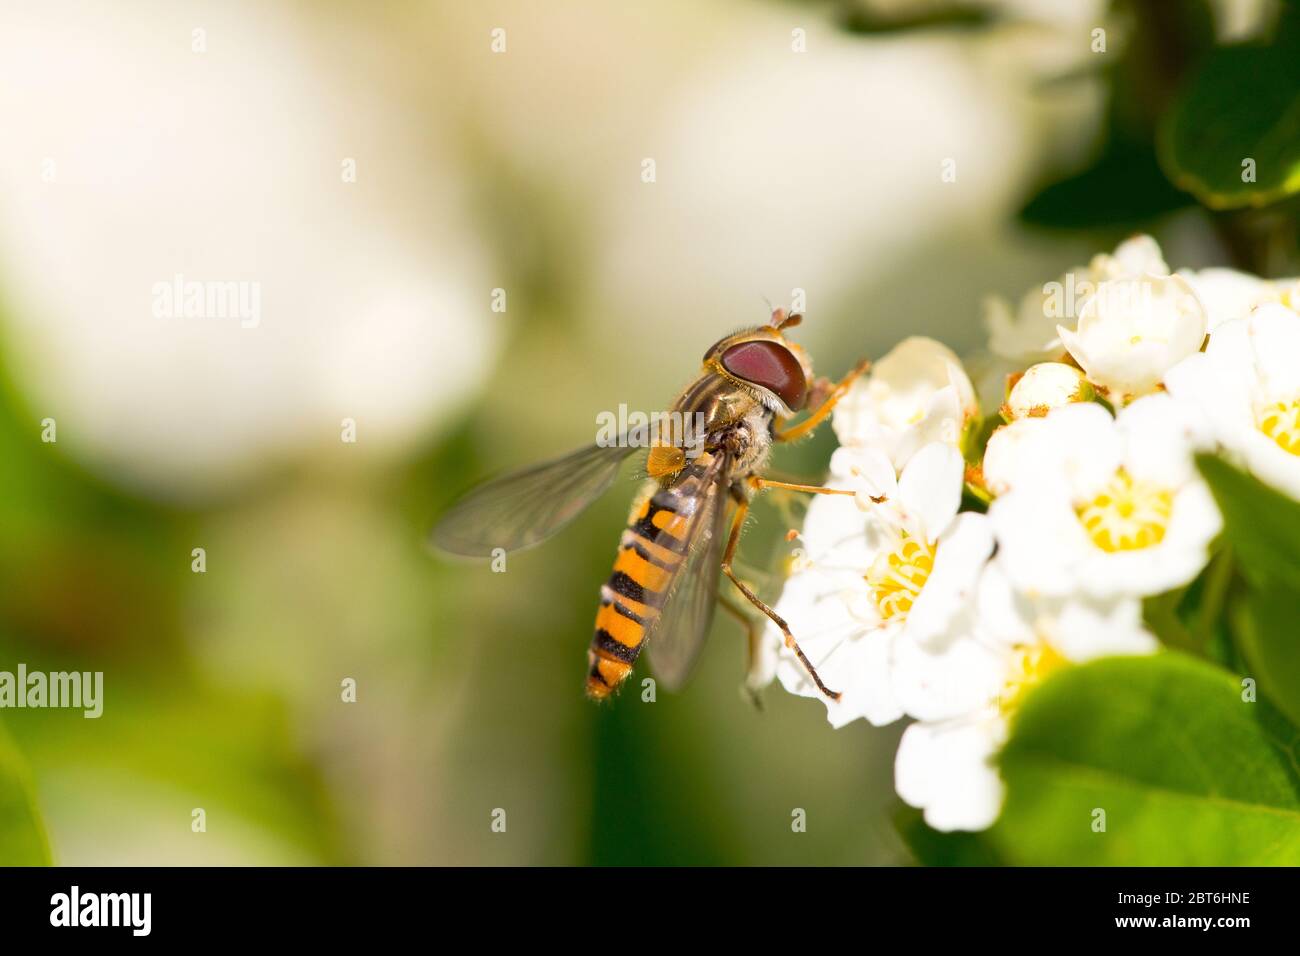 Hoverfly in a flower Stock Photo